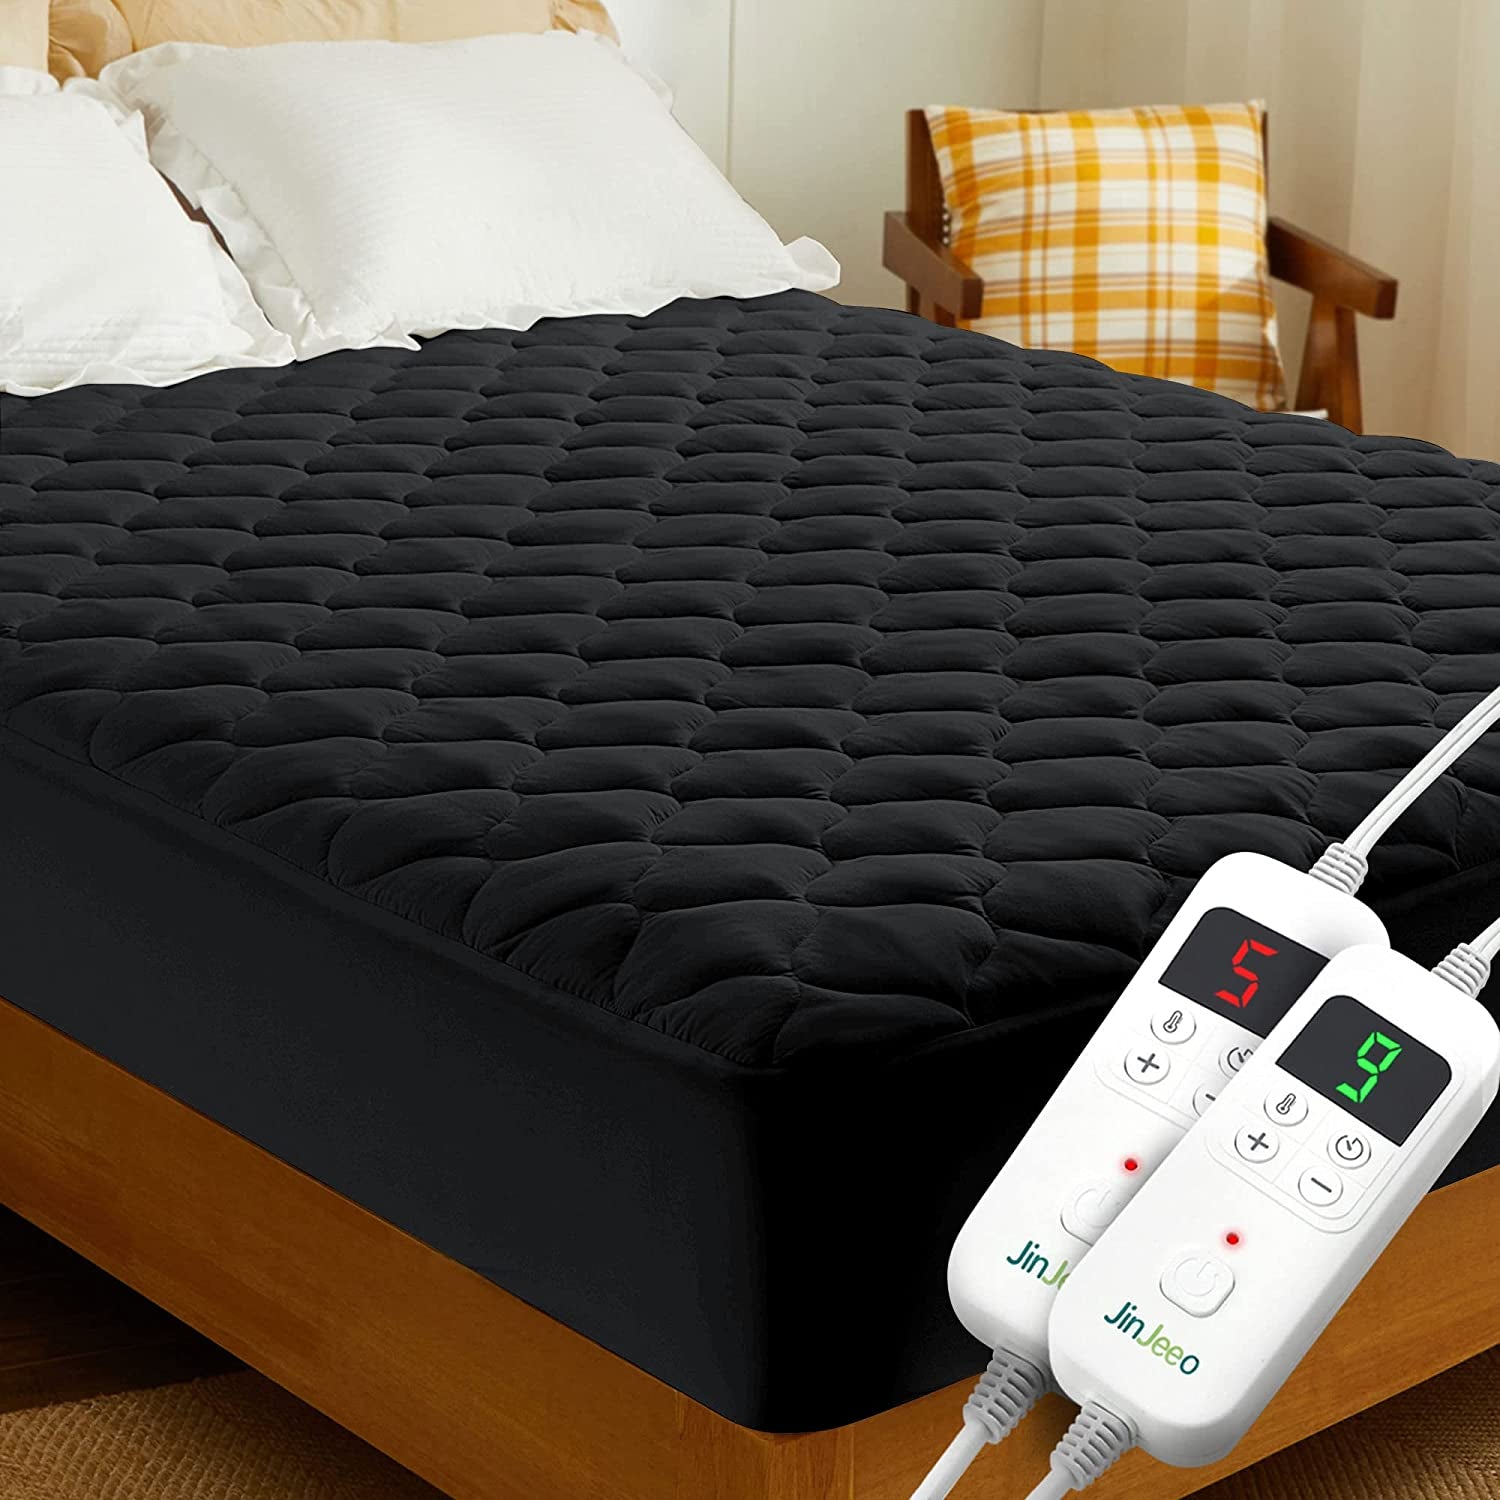 Heated Mattress Pad King Size Electric Mattress Pads Black Electric Bed Warmer Fit up to 21" with 11 Heat Settings Single Controller 9 Hours Auto Shut Off